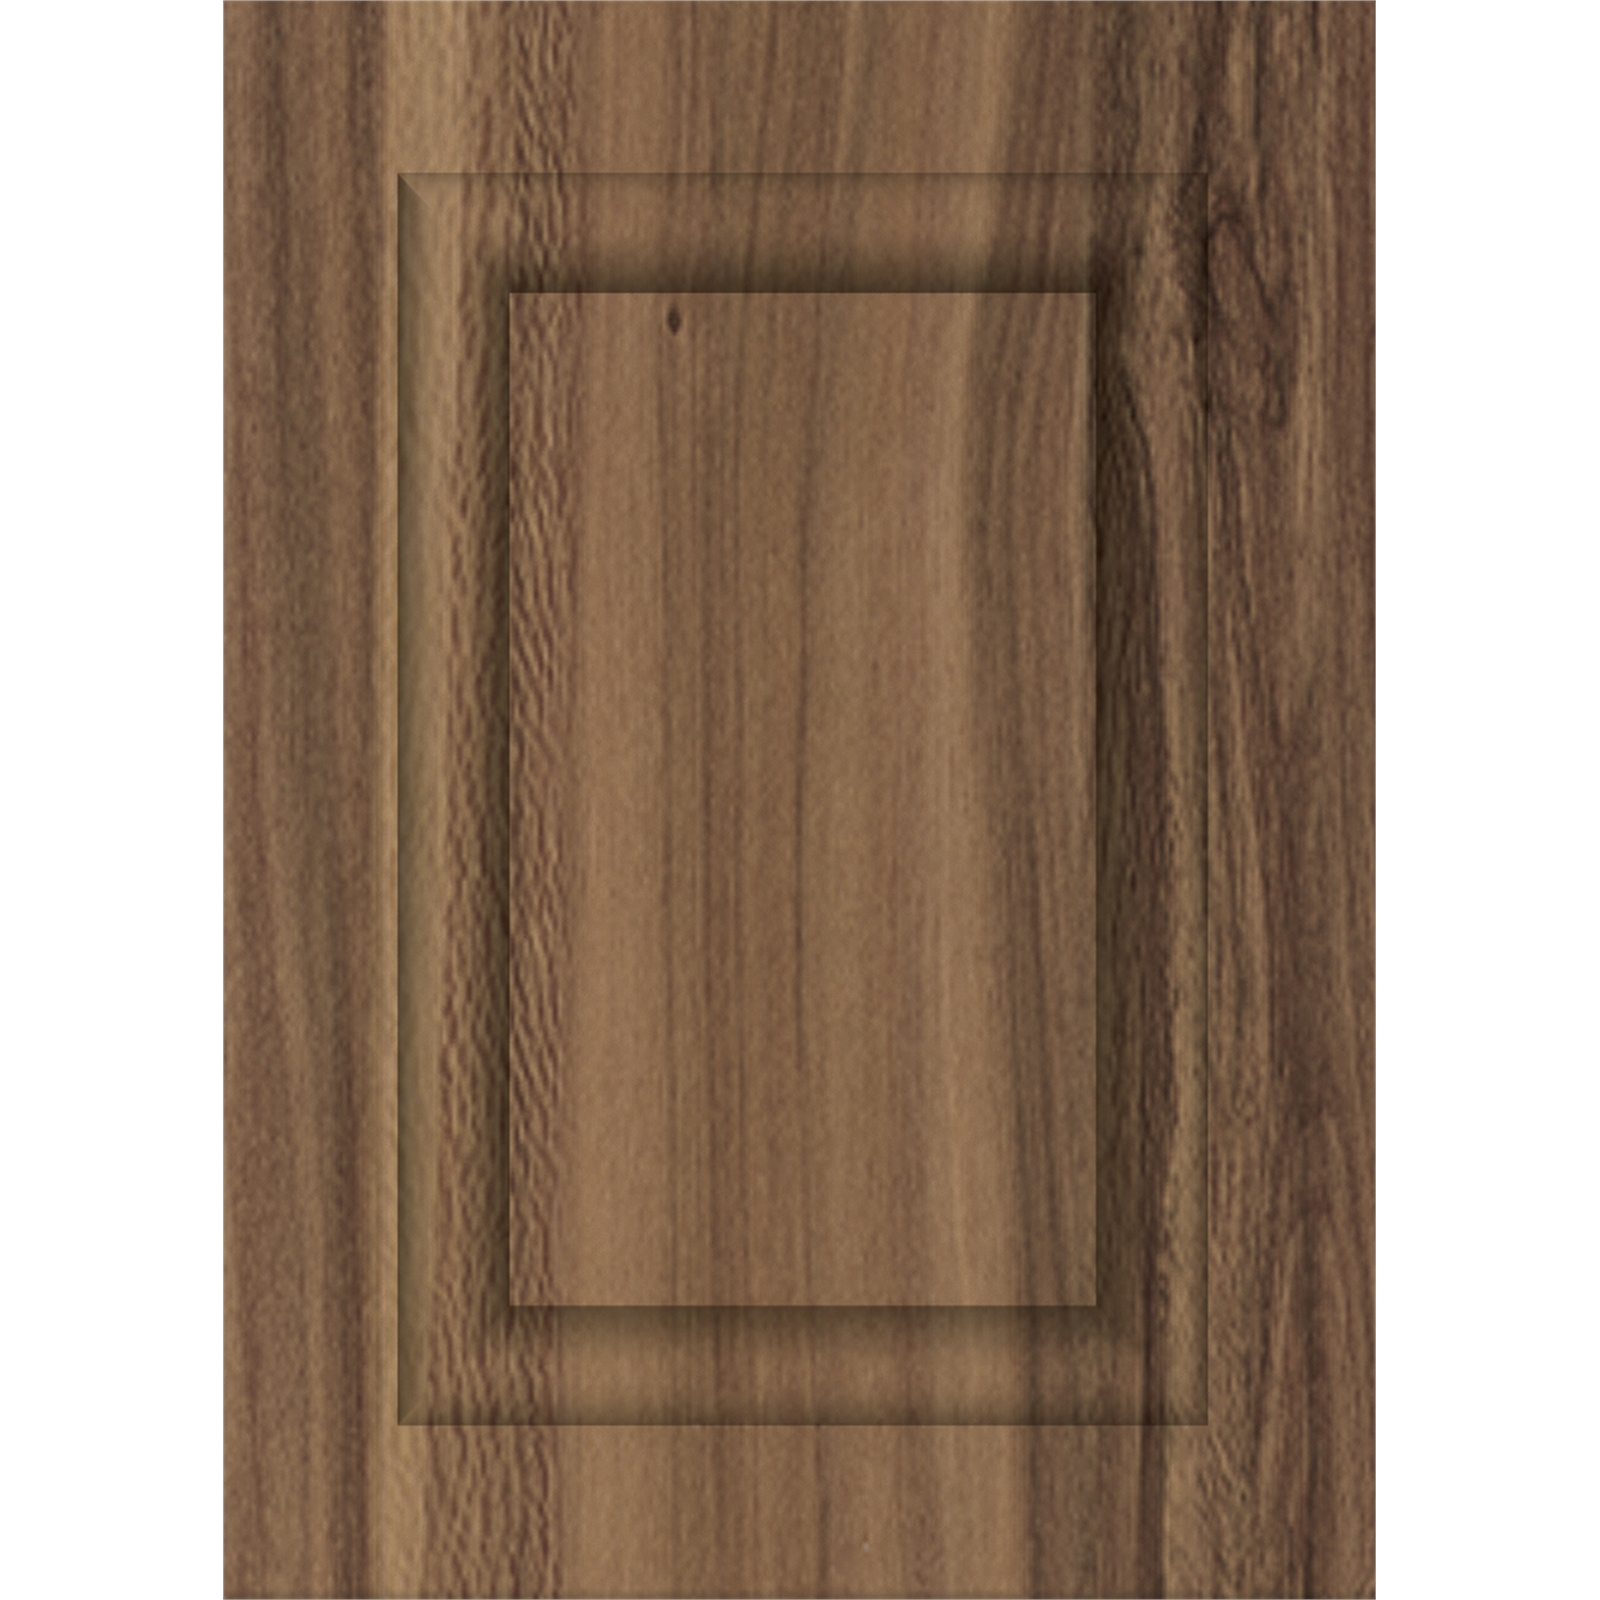 Kaboodle 600mm Outback Heritage Pantry Door